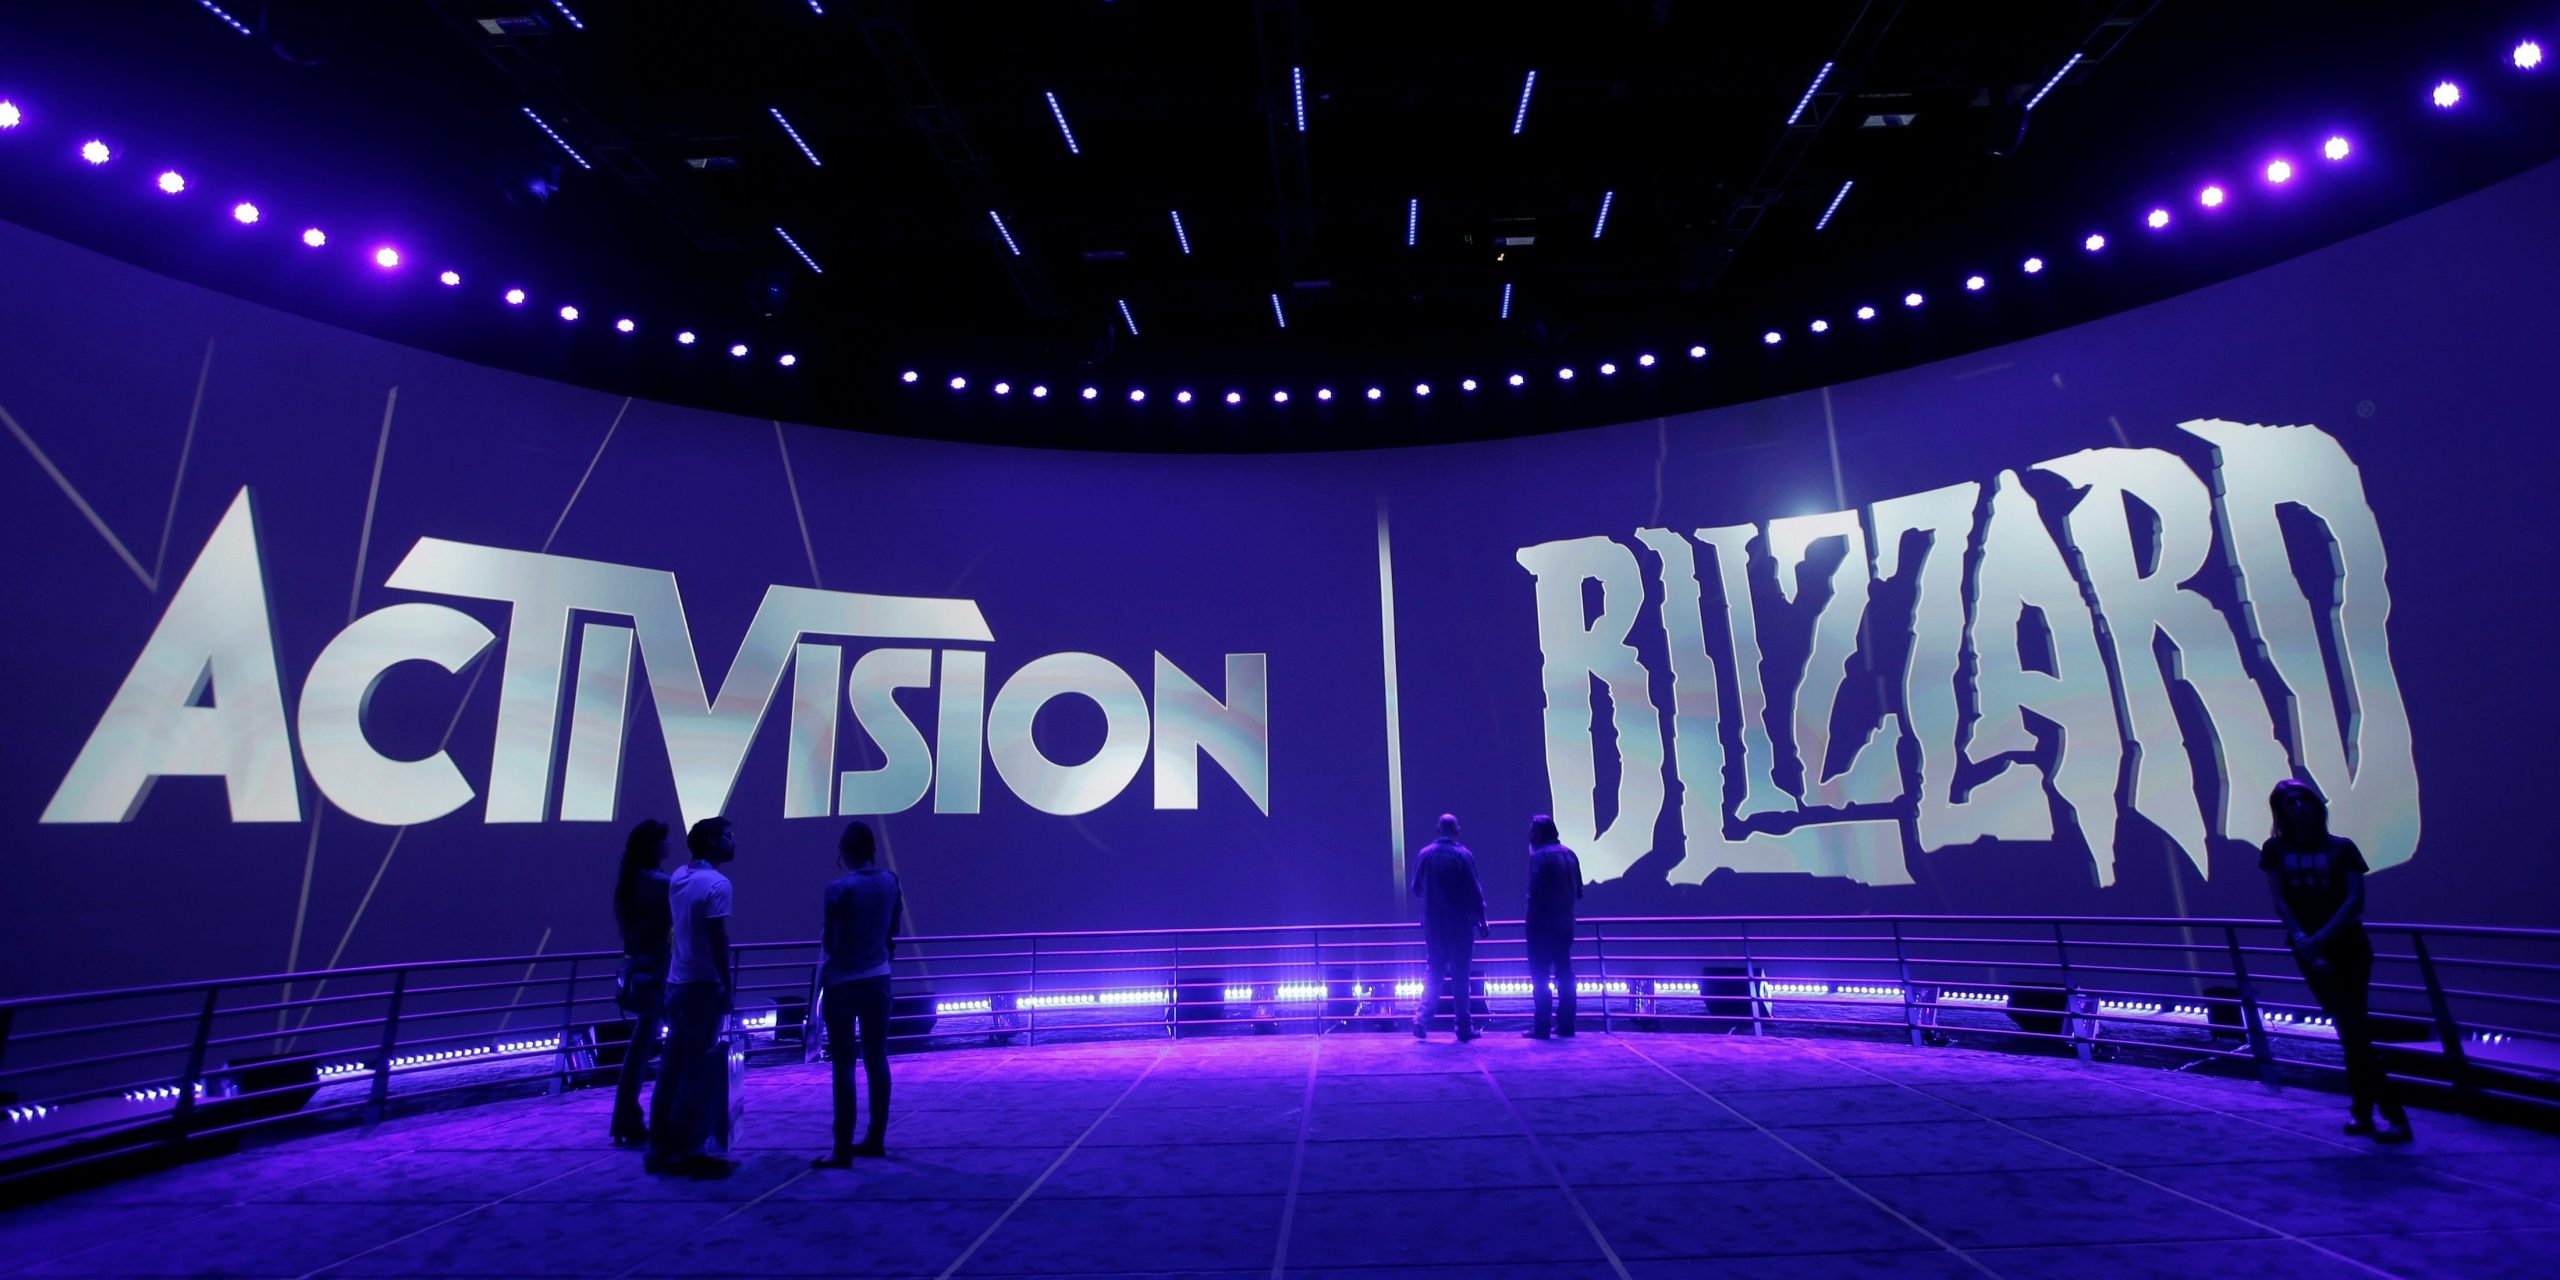 The Activision Blizzard booth at the 2013 E3 expo in Los Angeles